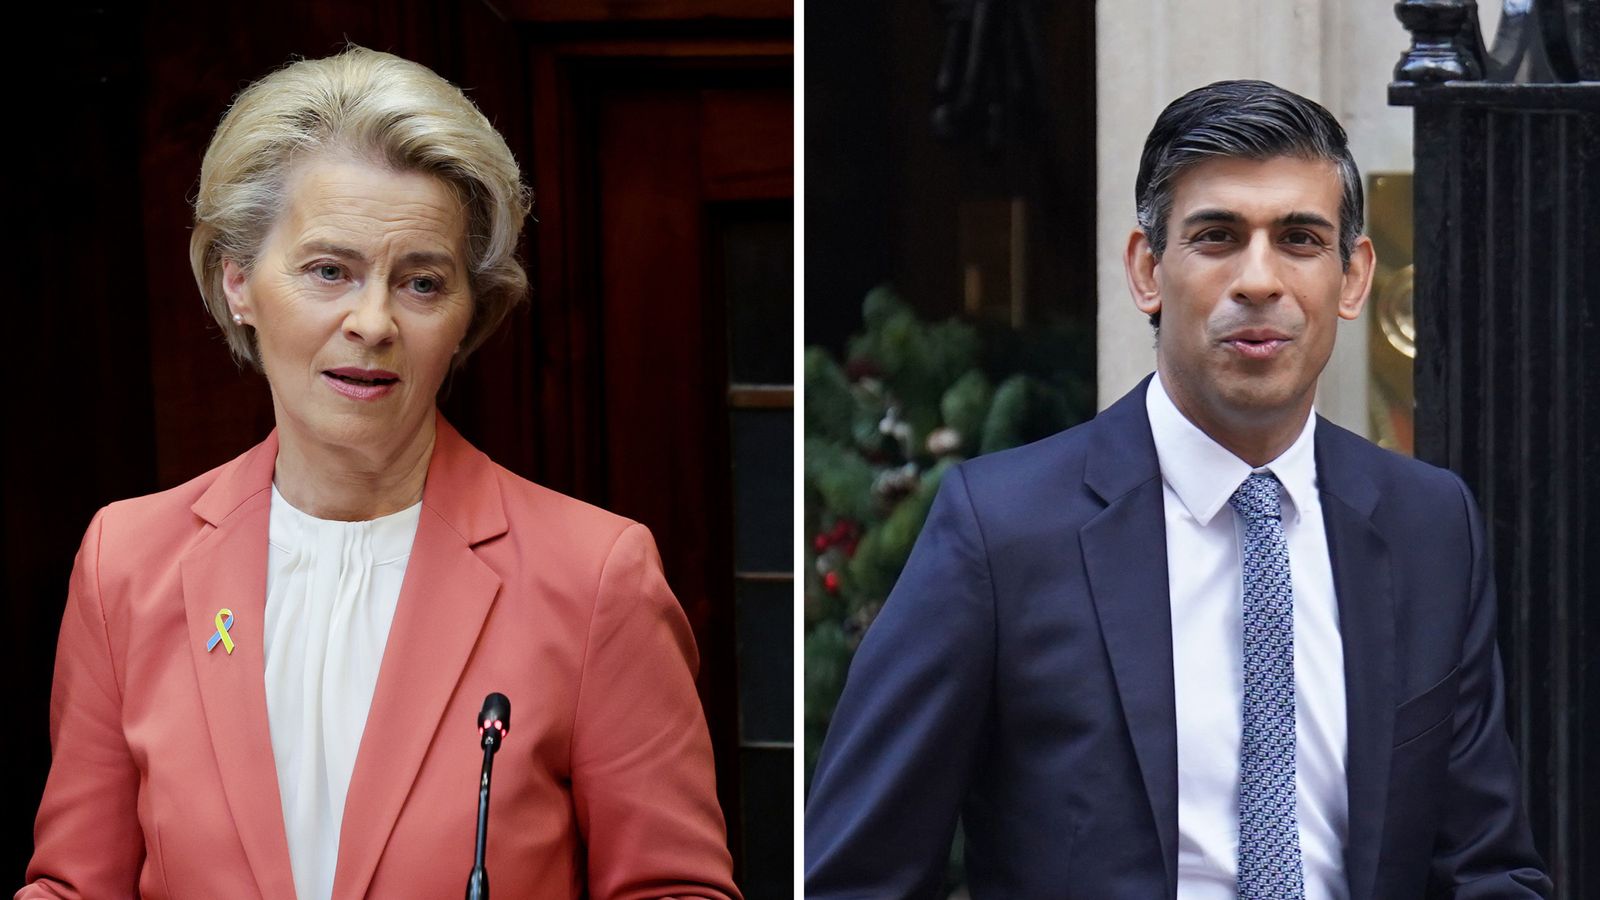 EU's Ursula von der Leyen 'very confident' NI Protocol solution can be found after 'encouraging' meetings with Rishi Sunak